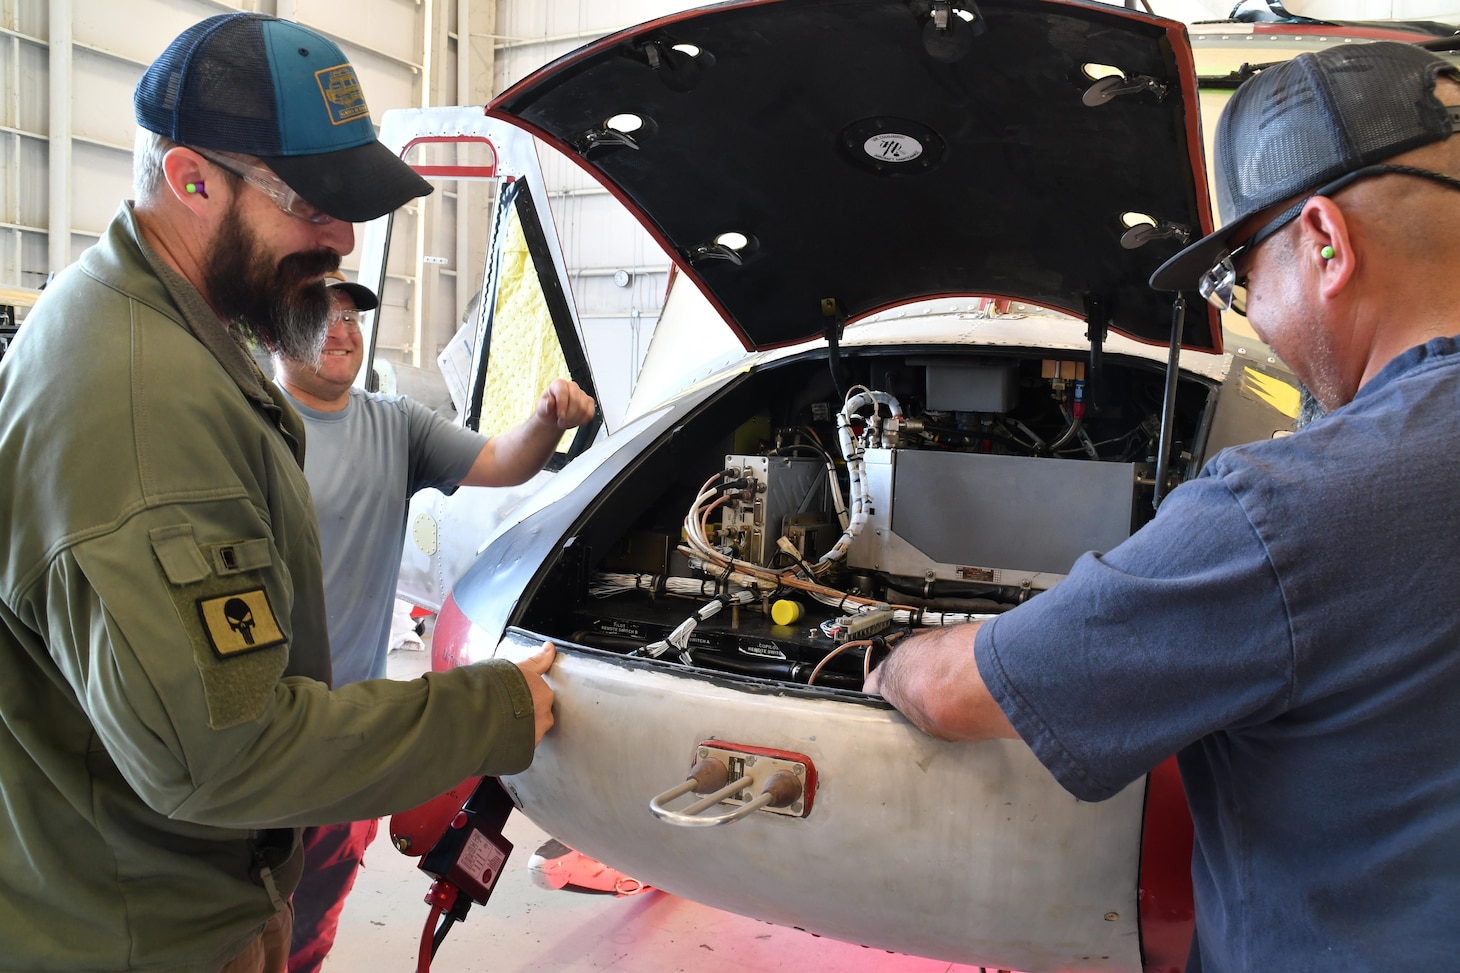 Matthew Pitts, left, the UH-1N deputy branch head and test pilot at Fleet Readiness Center East (FRCE), and Gabriel Rodriguez, a UH-1N plane captain, utilize a battery-powered ground power unit (GPU) while conducting checks on a UH-1N helicopter. FRCE’s UH-1N production line is swapping out diesel-powered GPUs for battery-powered GPUs, becoming the first adapter of this technology within the Naval Aviation community.